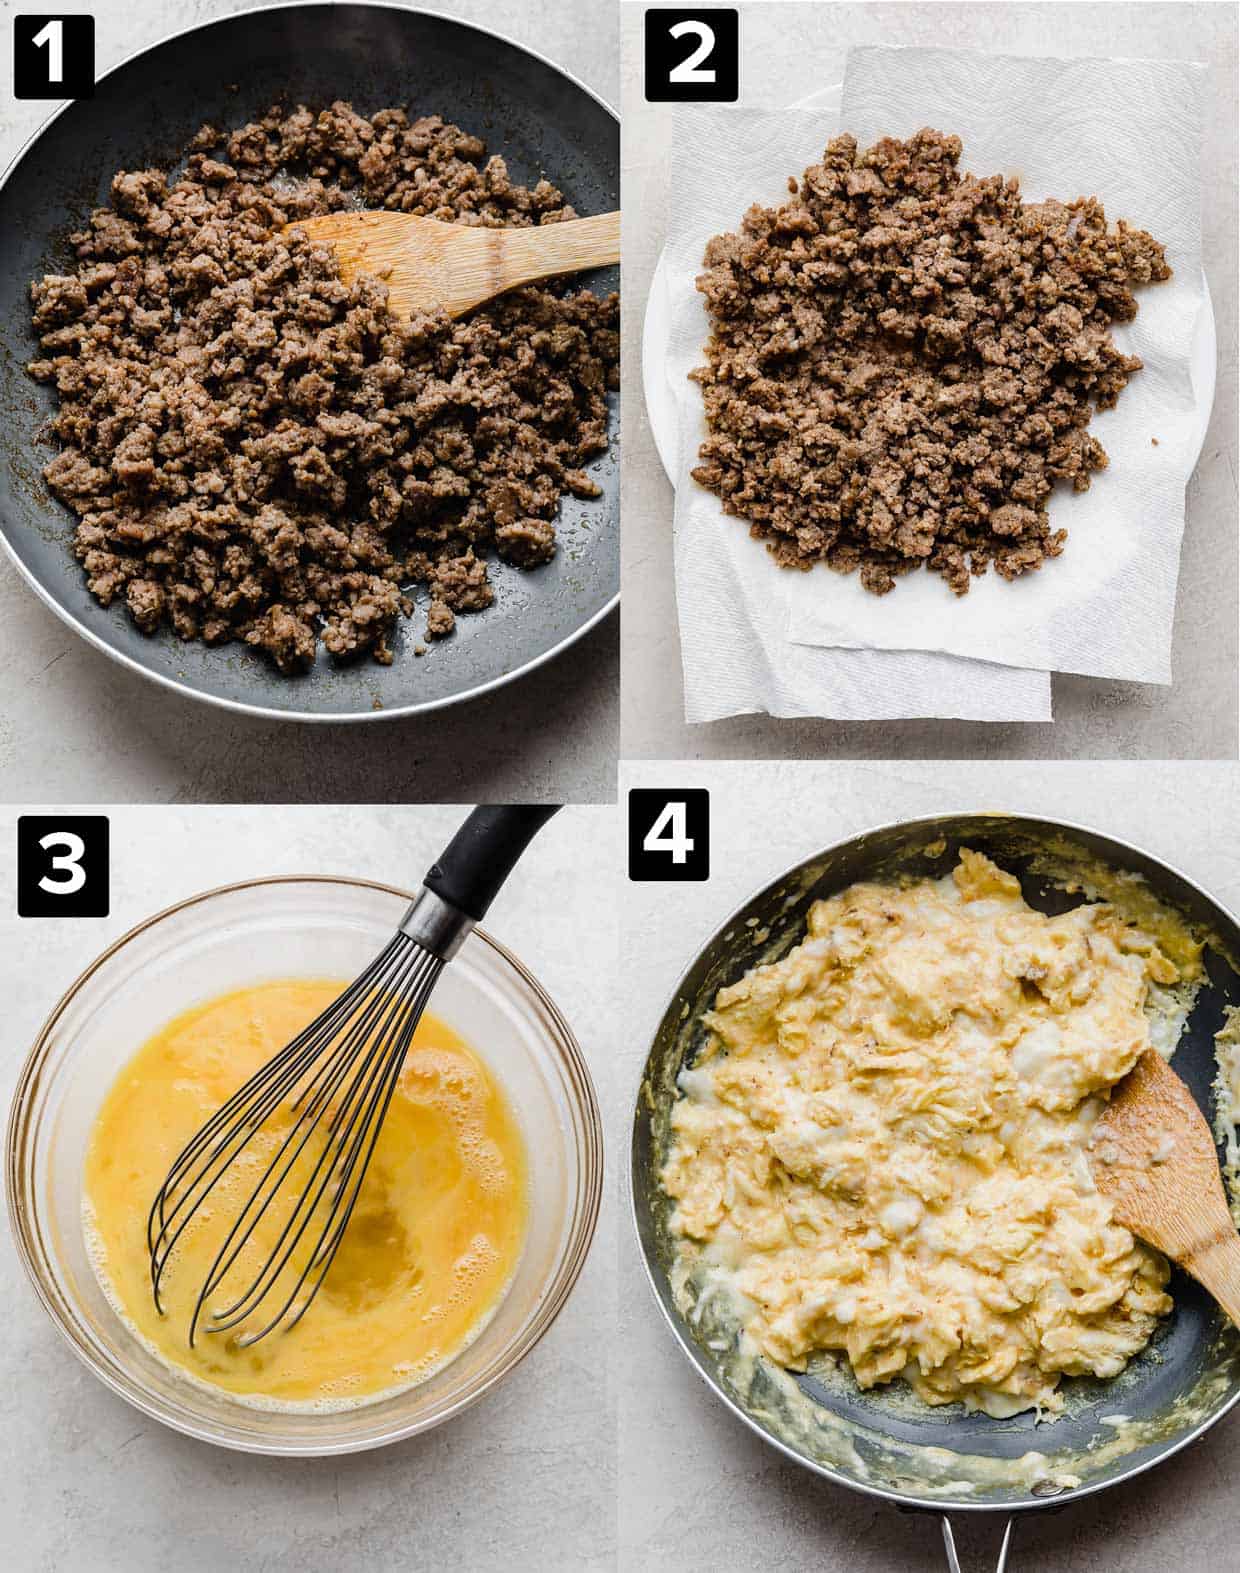 Four photos showing showing how to make Jimmy Dean Breakfast Burritos: sausage in a skillet, sausage on a plate, whisk mixing eggs, cooked eggs in skillet.